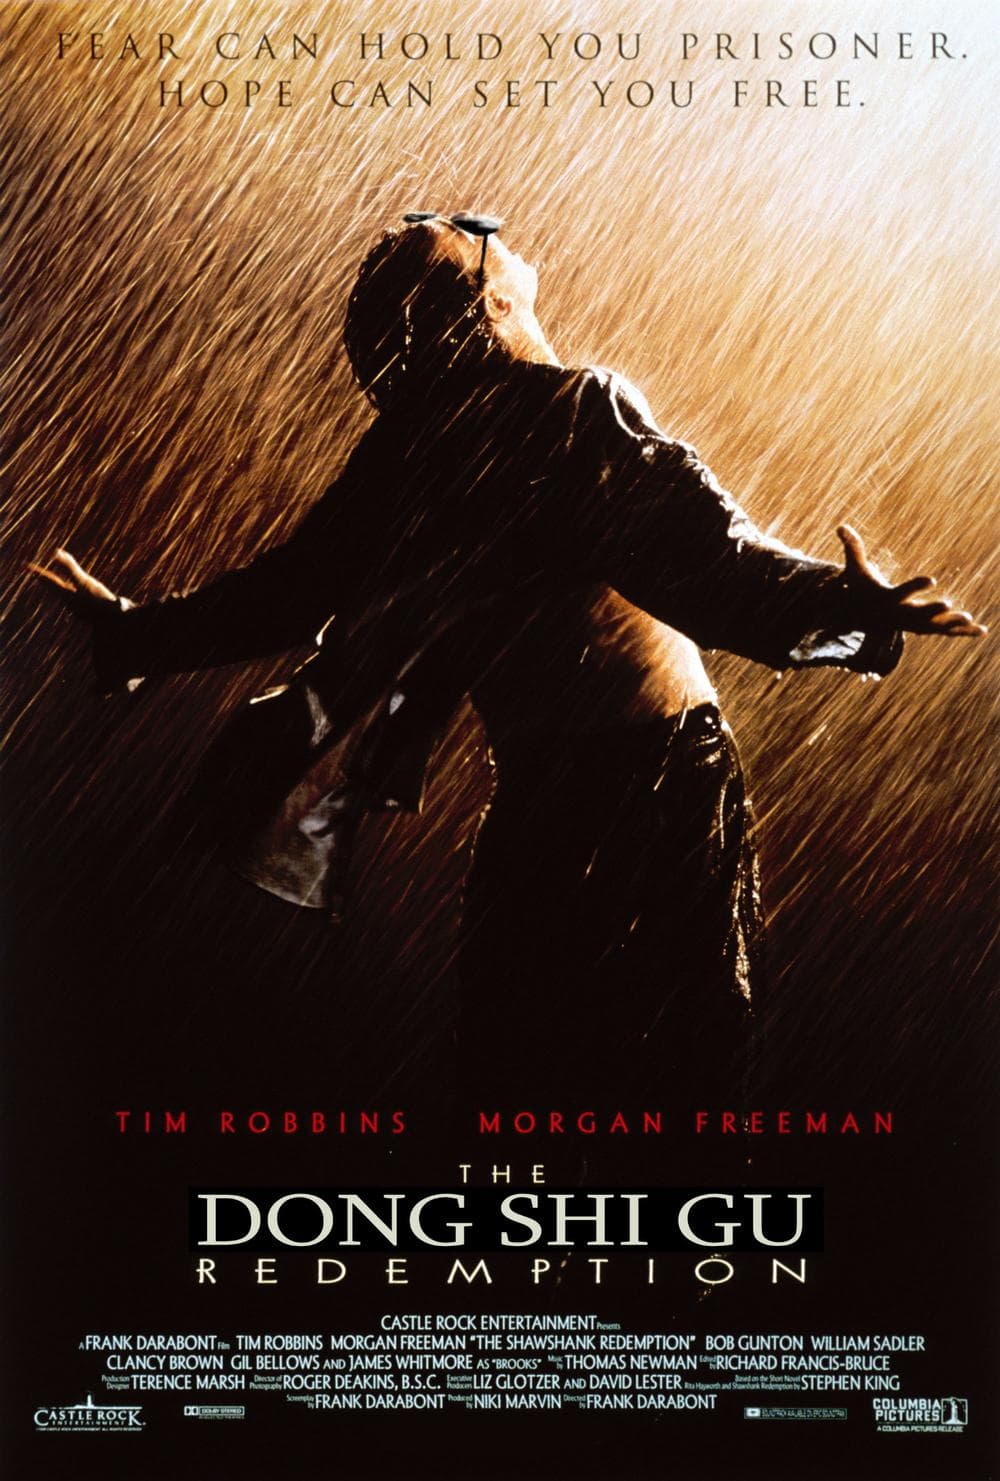 Chen Guangcheng meme-ified in &quot;Shawshank Redemption&quot; poster